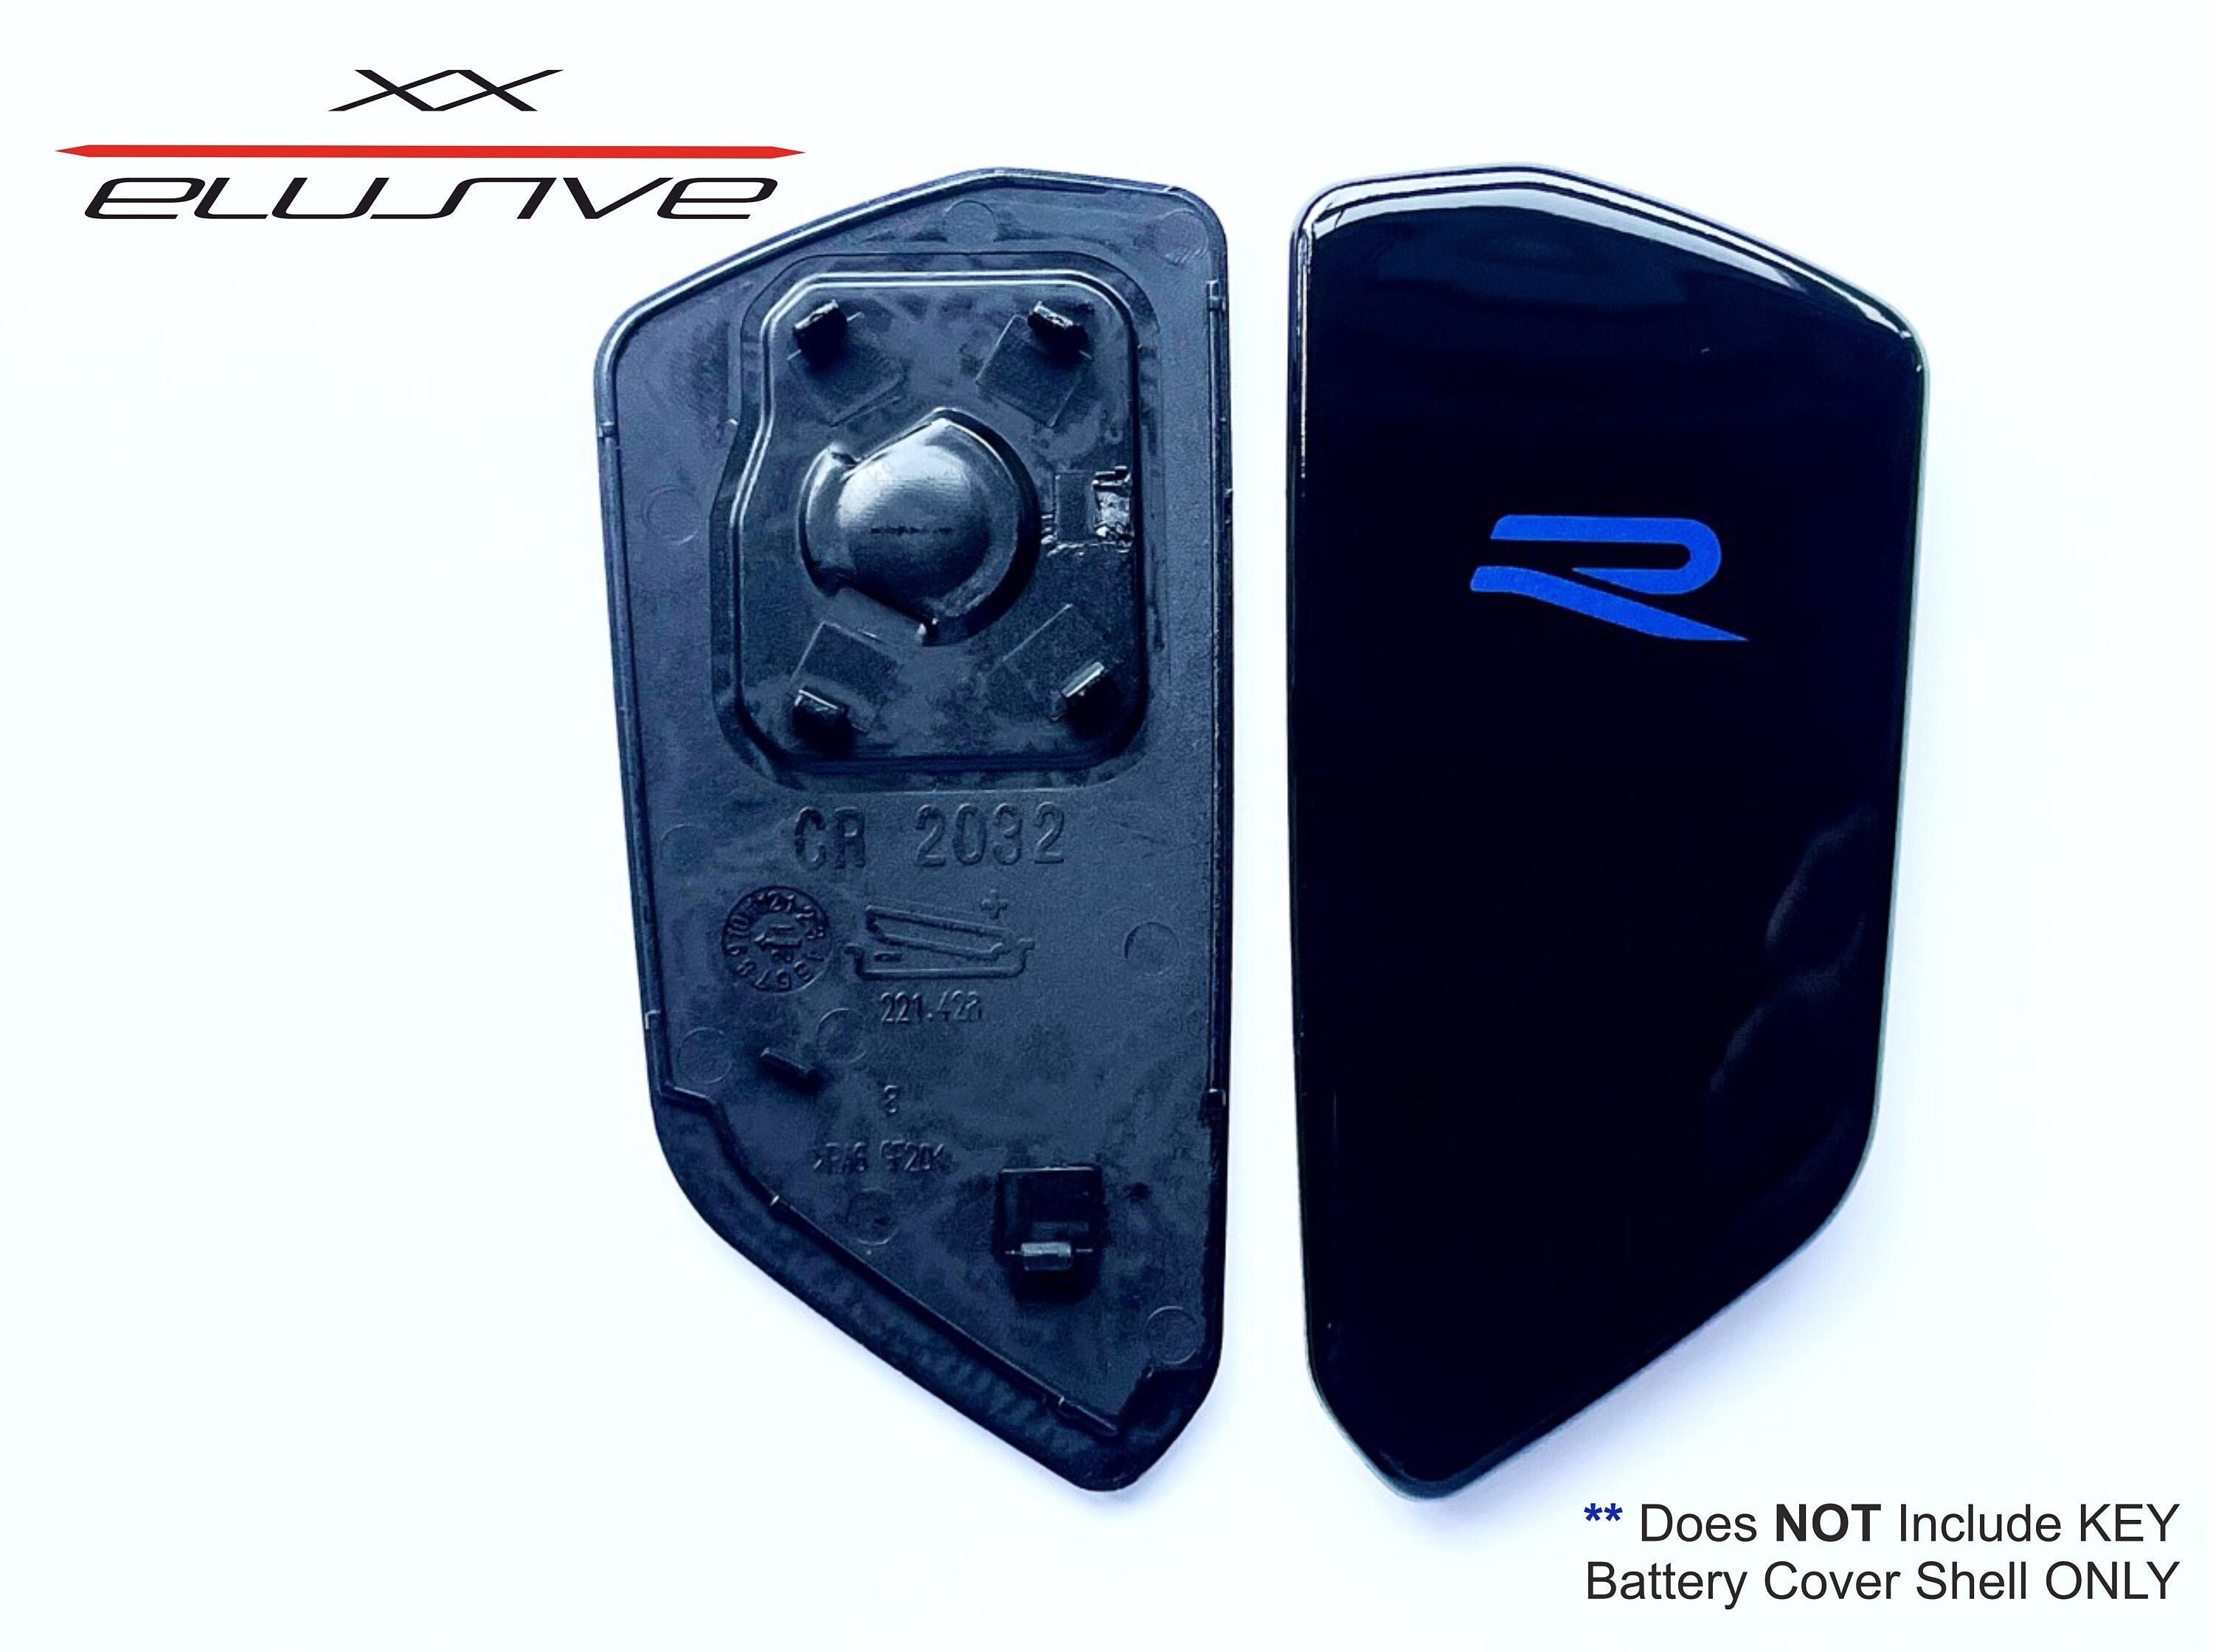 Volkswagen Golf R MK8 Key Cover Battery Key Cover Replacement - Etsy